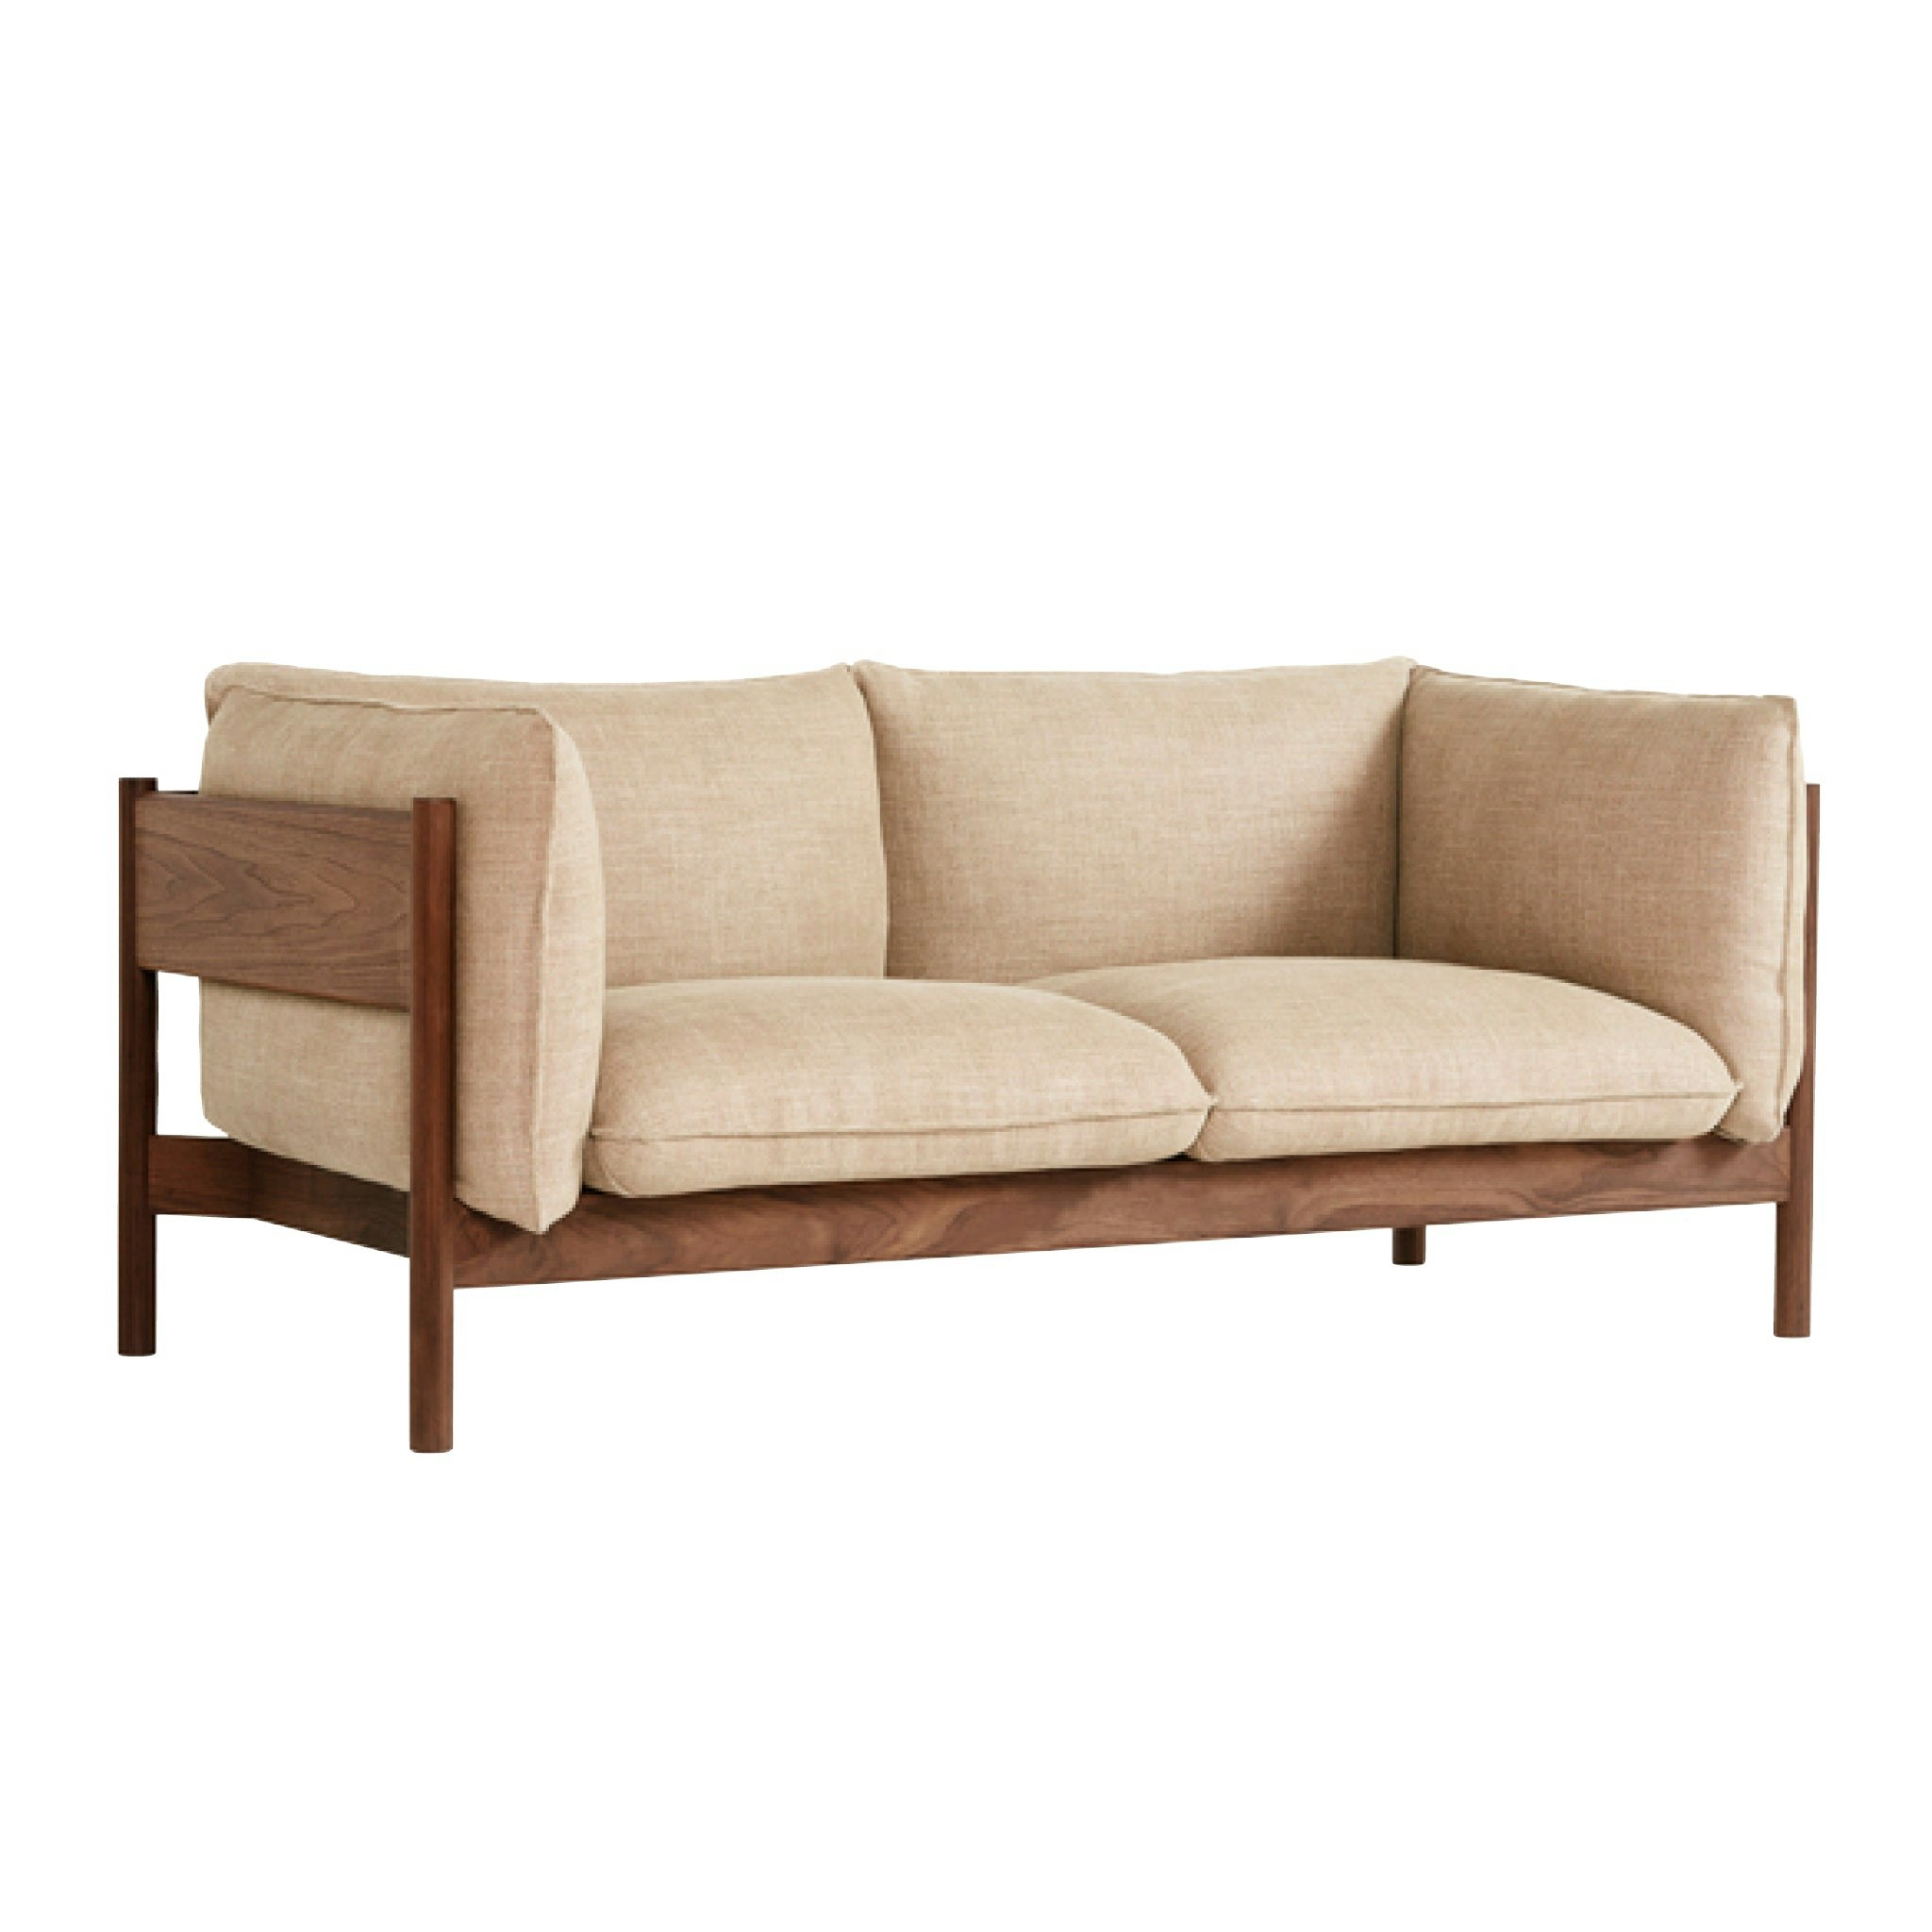 Arbour Sofa 2 Seater by Hay